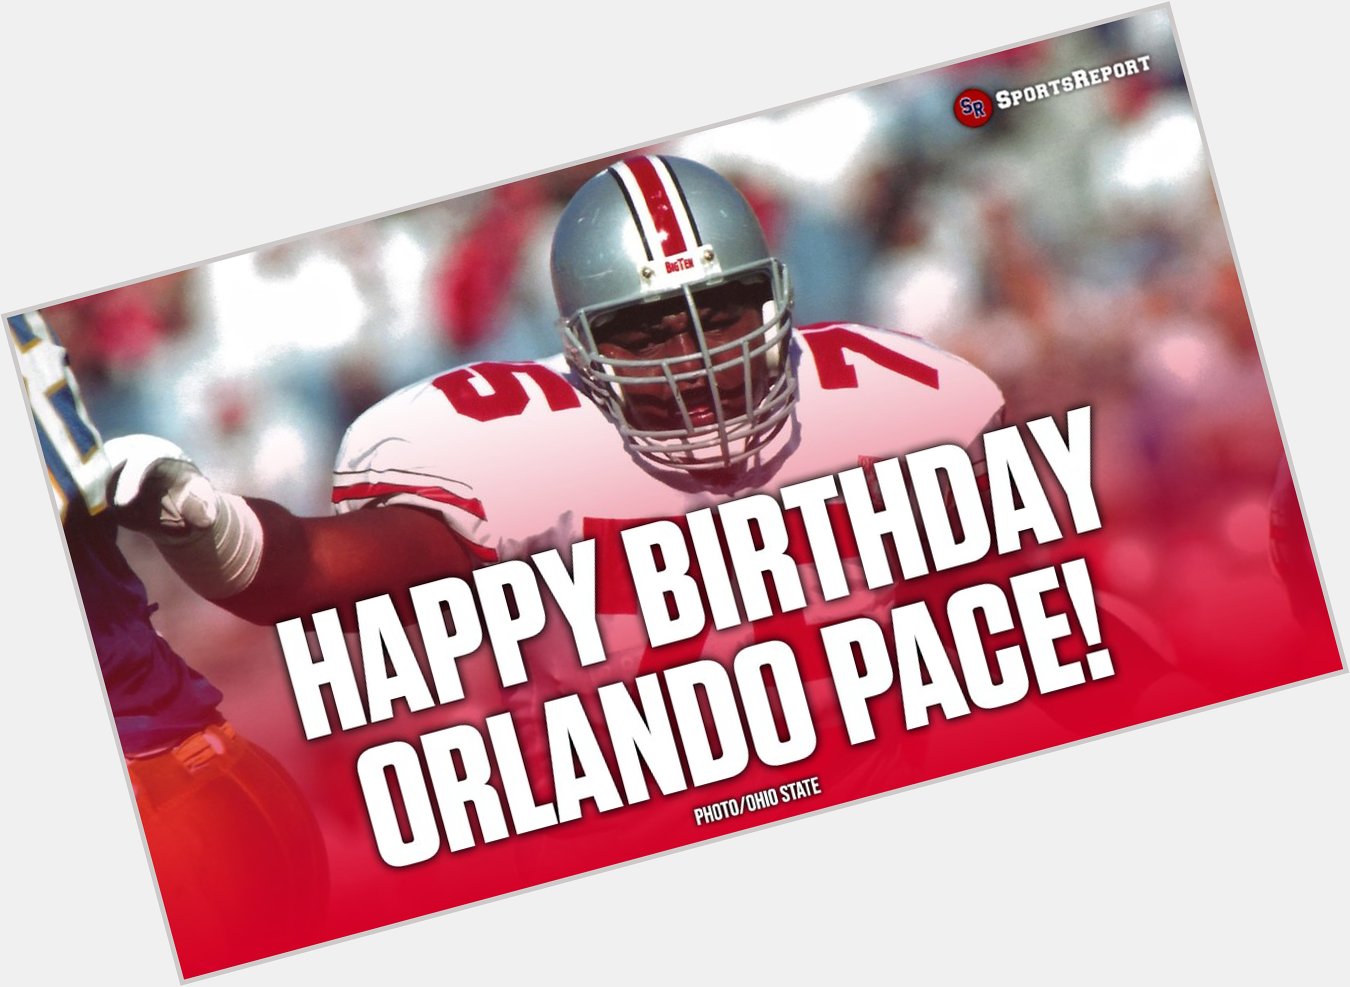  Fans, let\s wish legend Orlando Pace a Happy Birthday! GO 